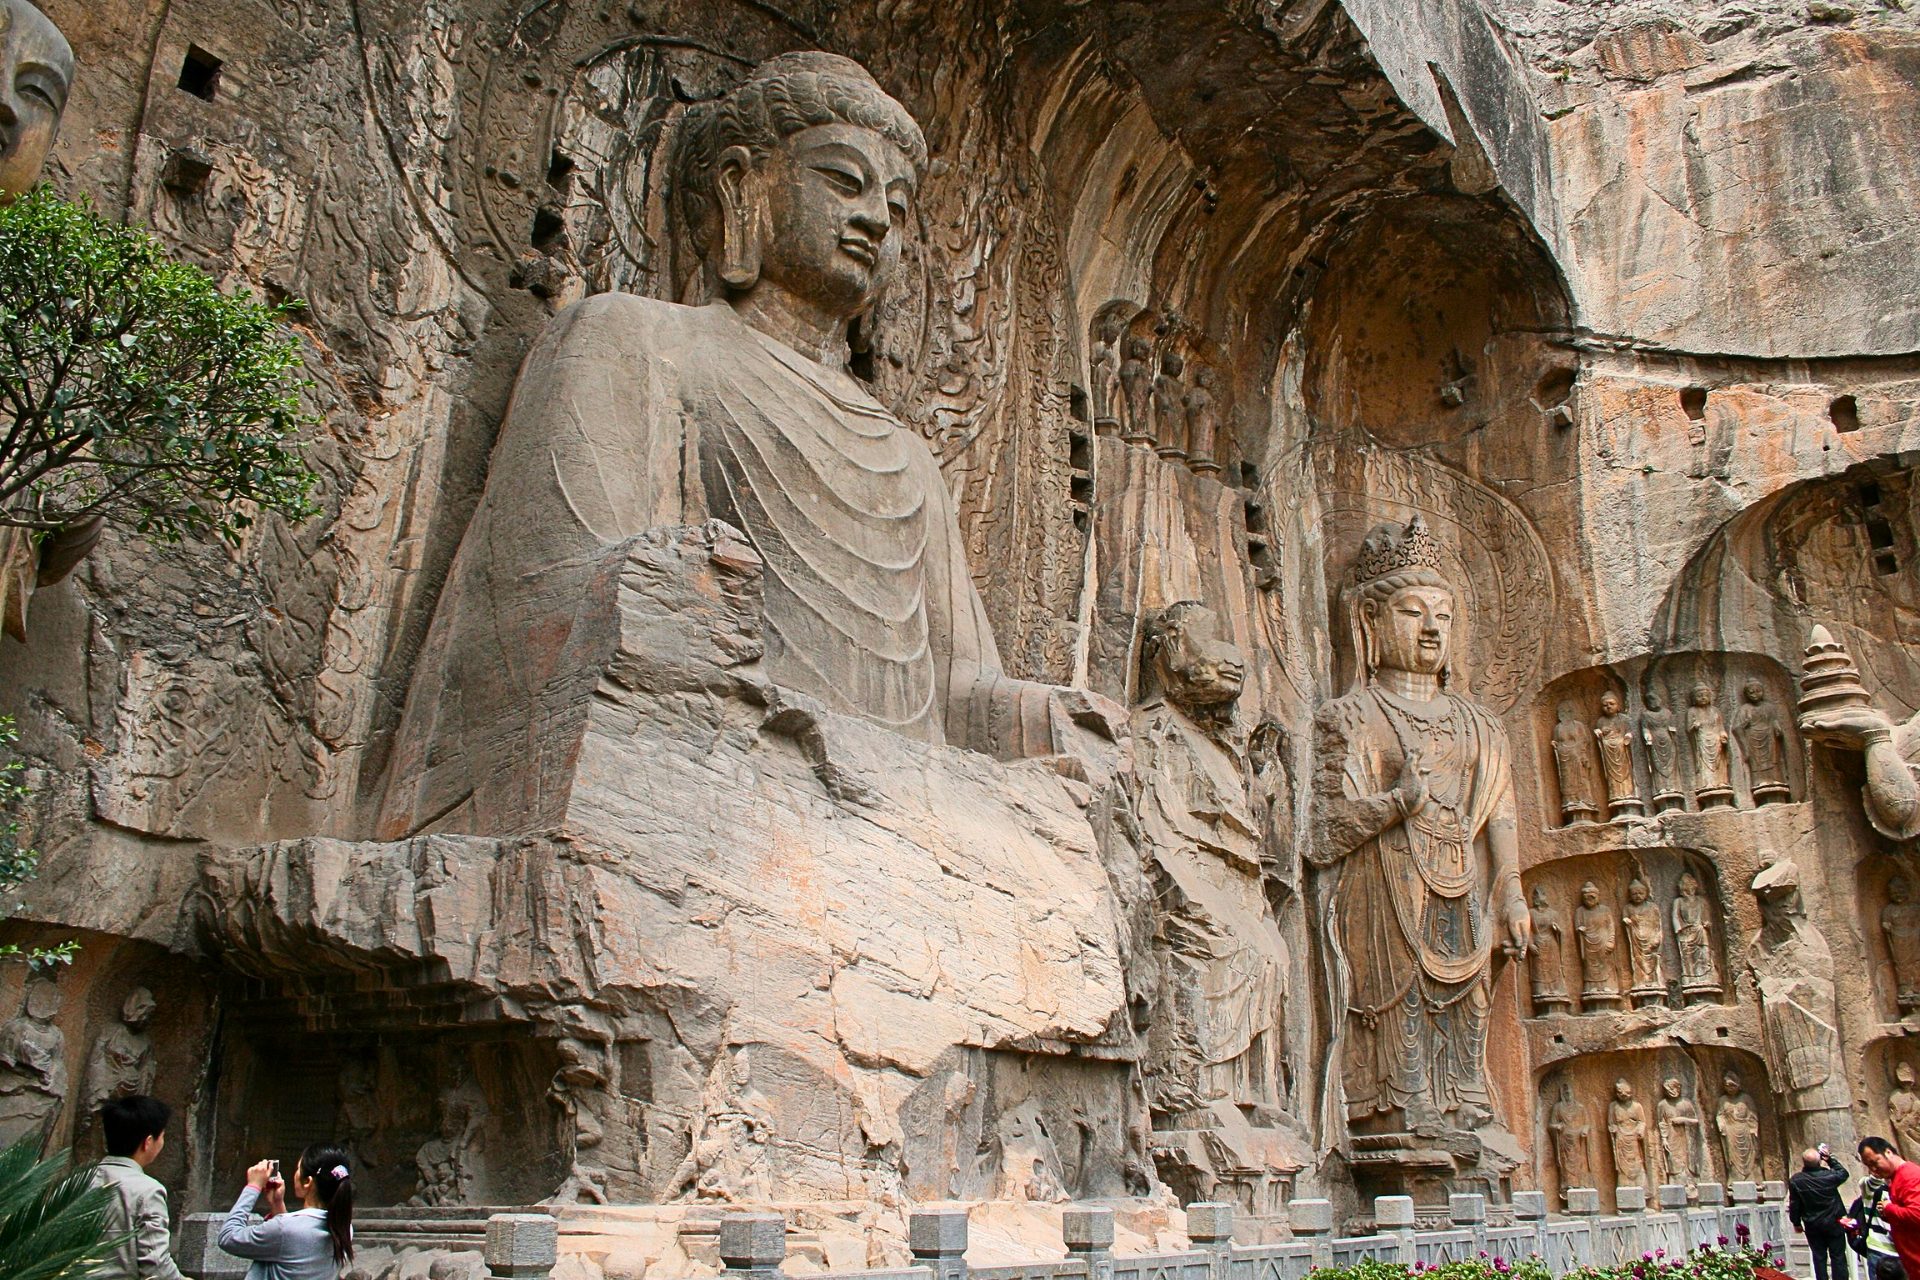 A photograph of large buddhist statues carved into the side of a mountain.